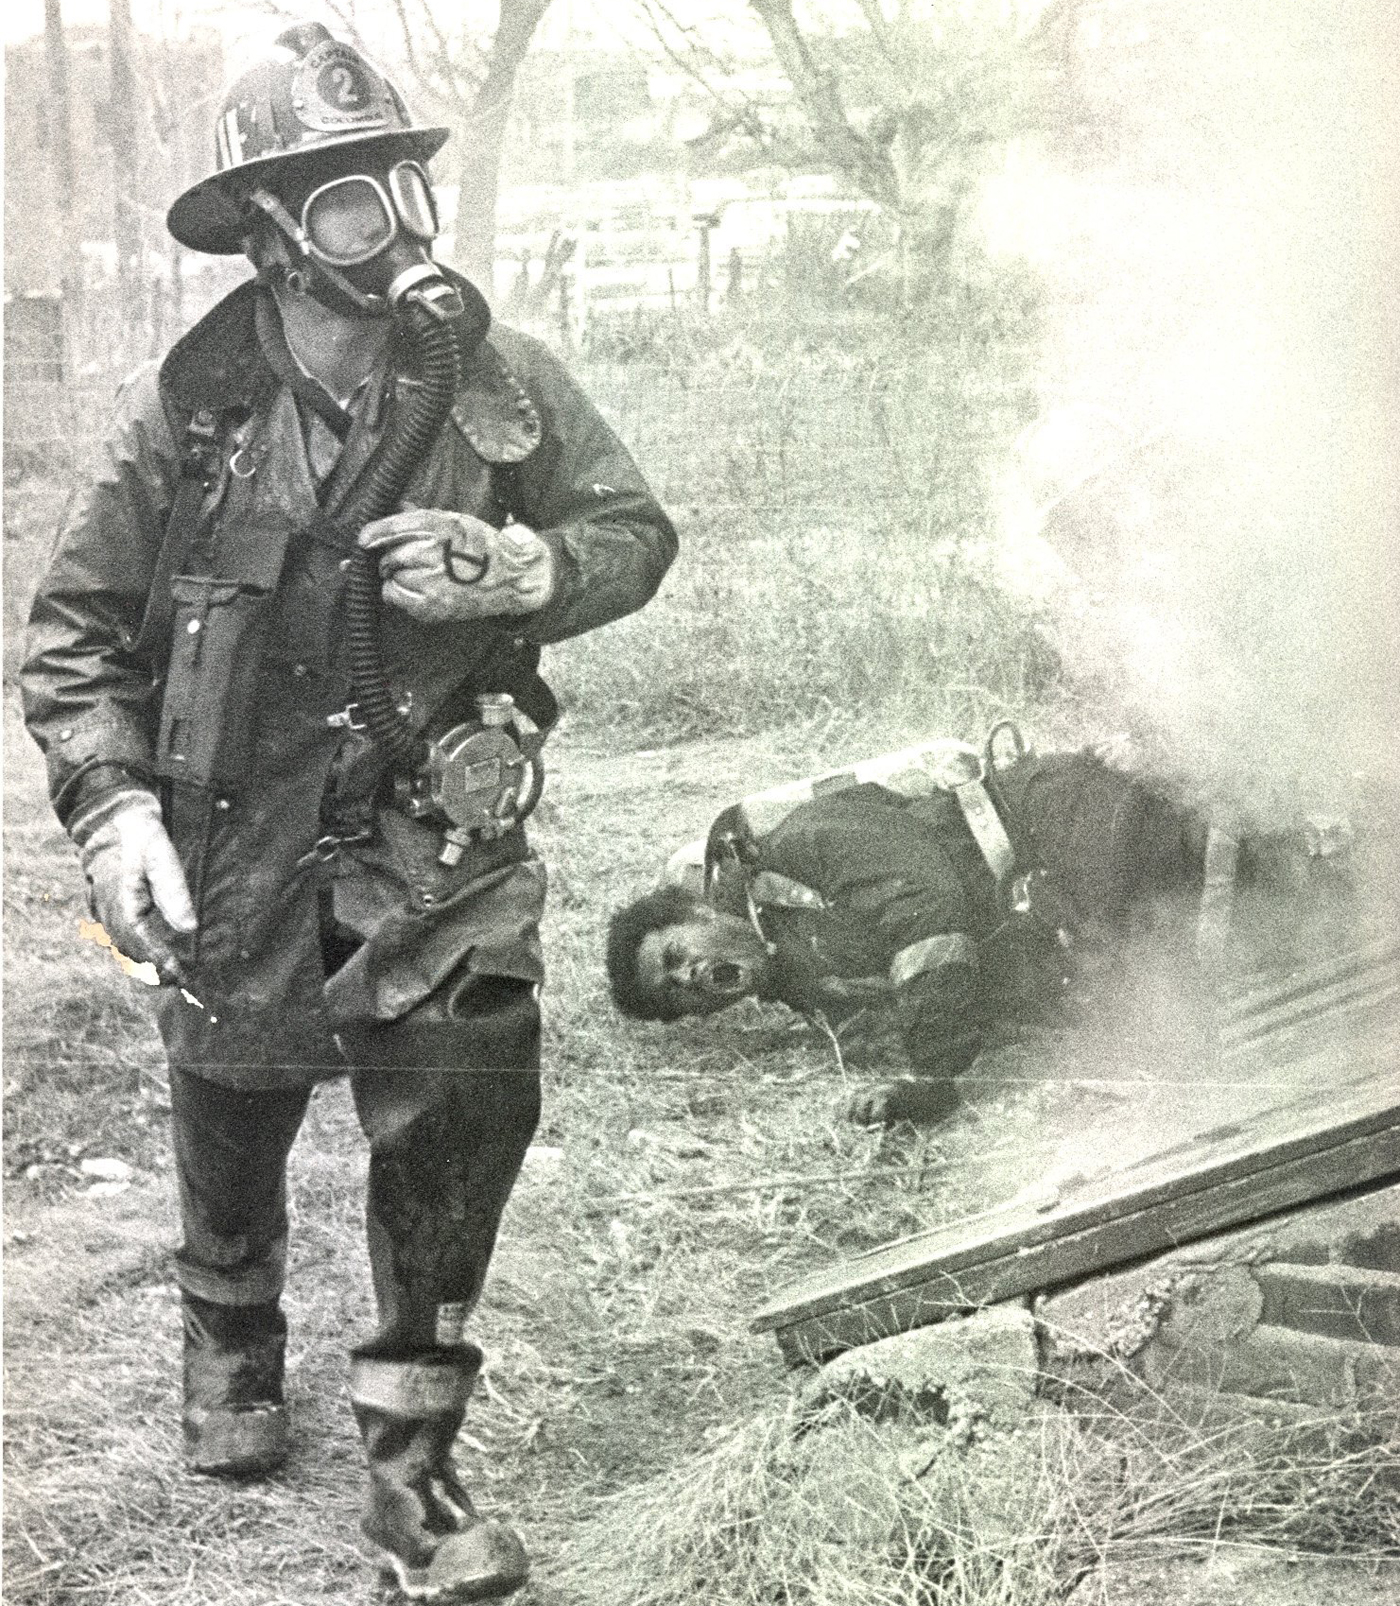 1975: Fire division trainee Stephen Ayers lies on the ground gasping for air after jumping from a first-floor window at a training fire. A firefighter runs to summon help. Ayers was treated for smoke inhalation at Grant Hospital. His face mask came off inside the burning vacant building. | Dispatch file photo